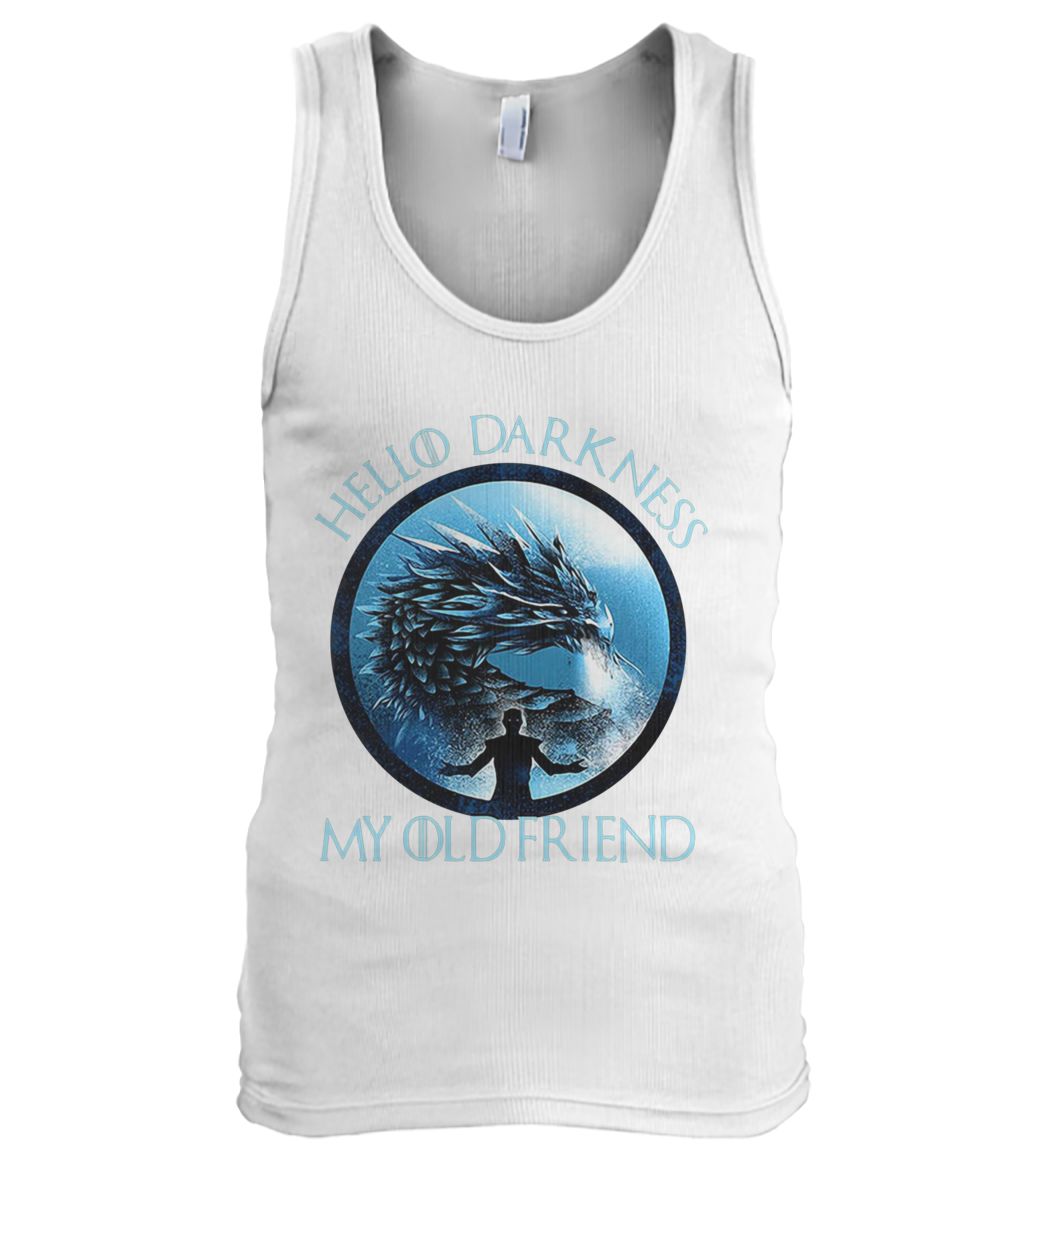 Game of thrones white walker the night king hello darkness my old friend men's tank top